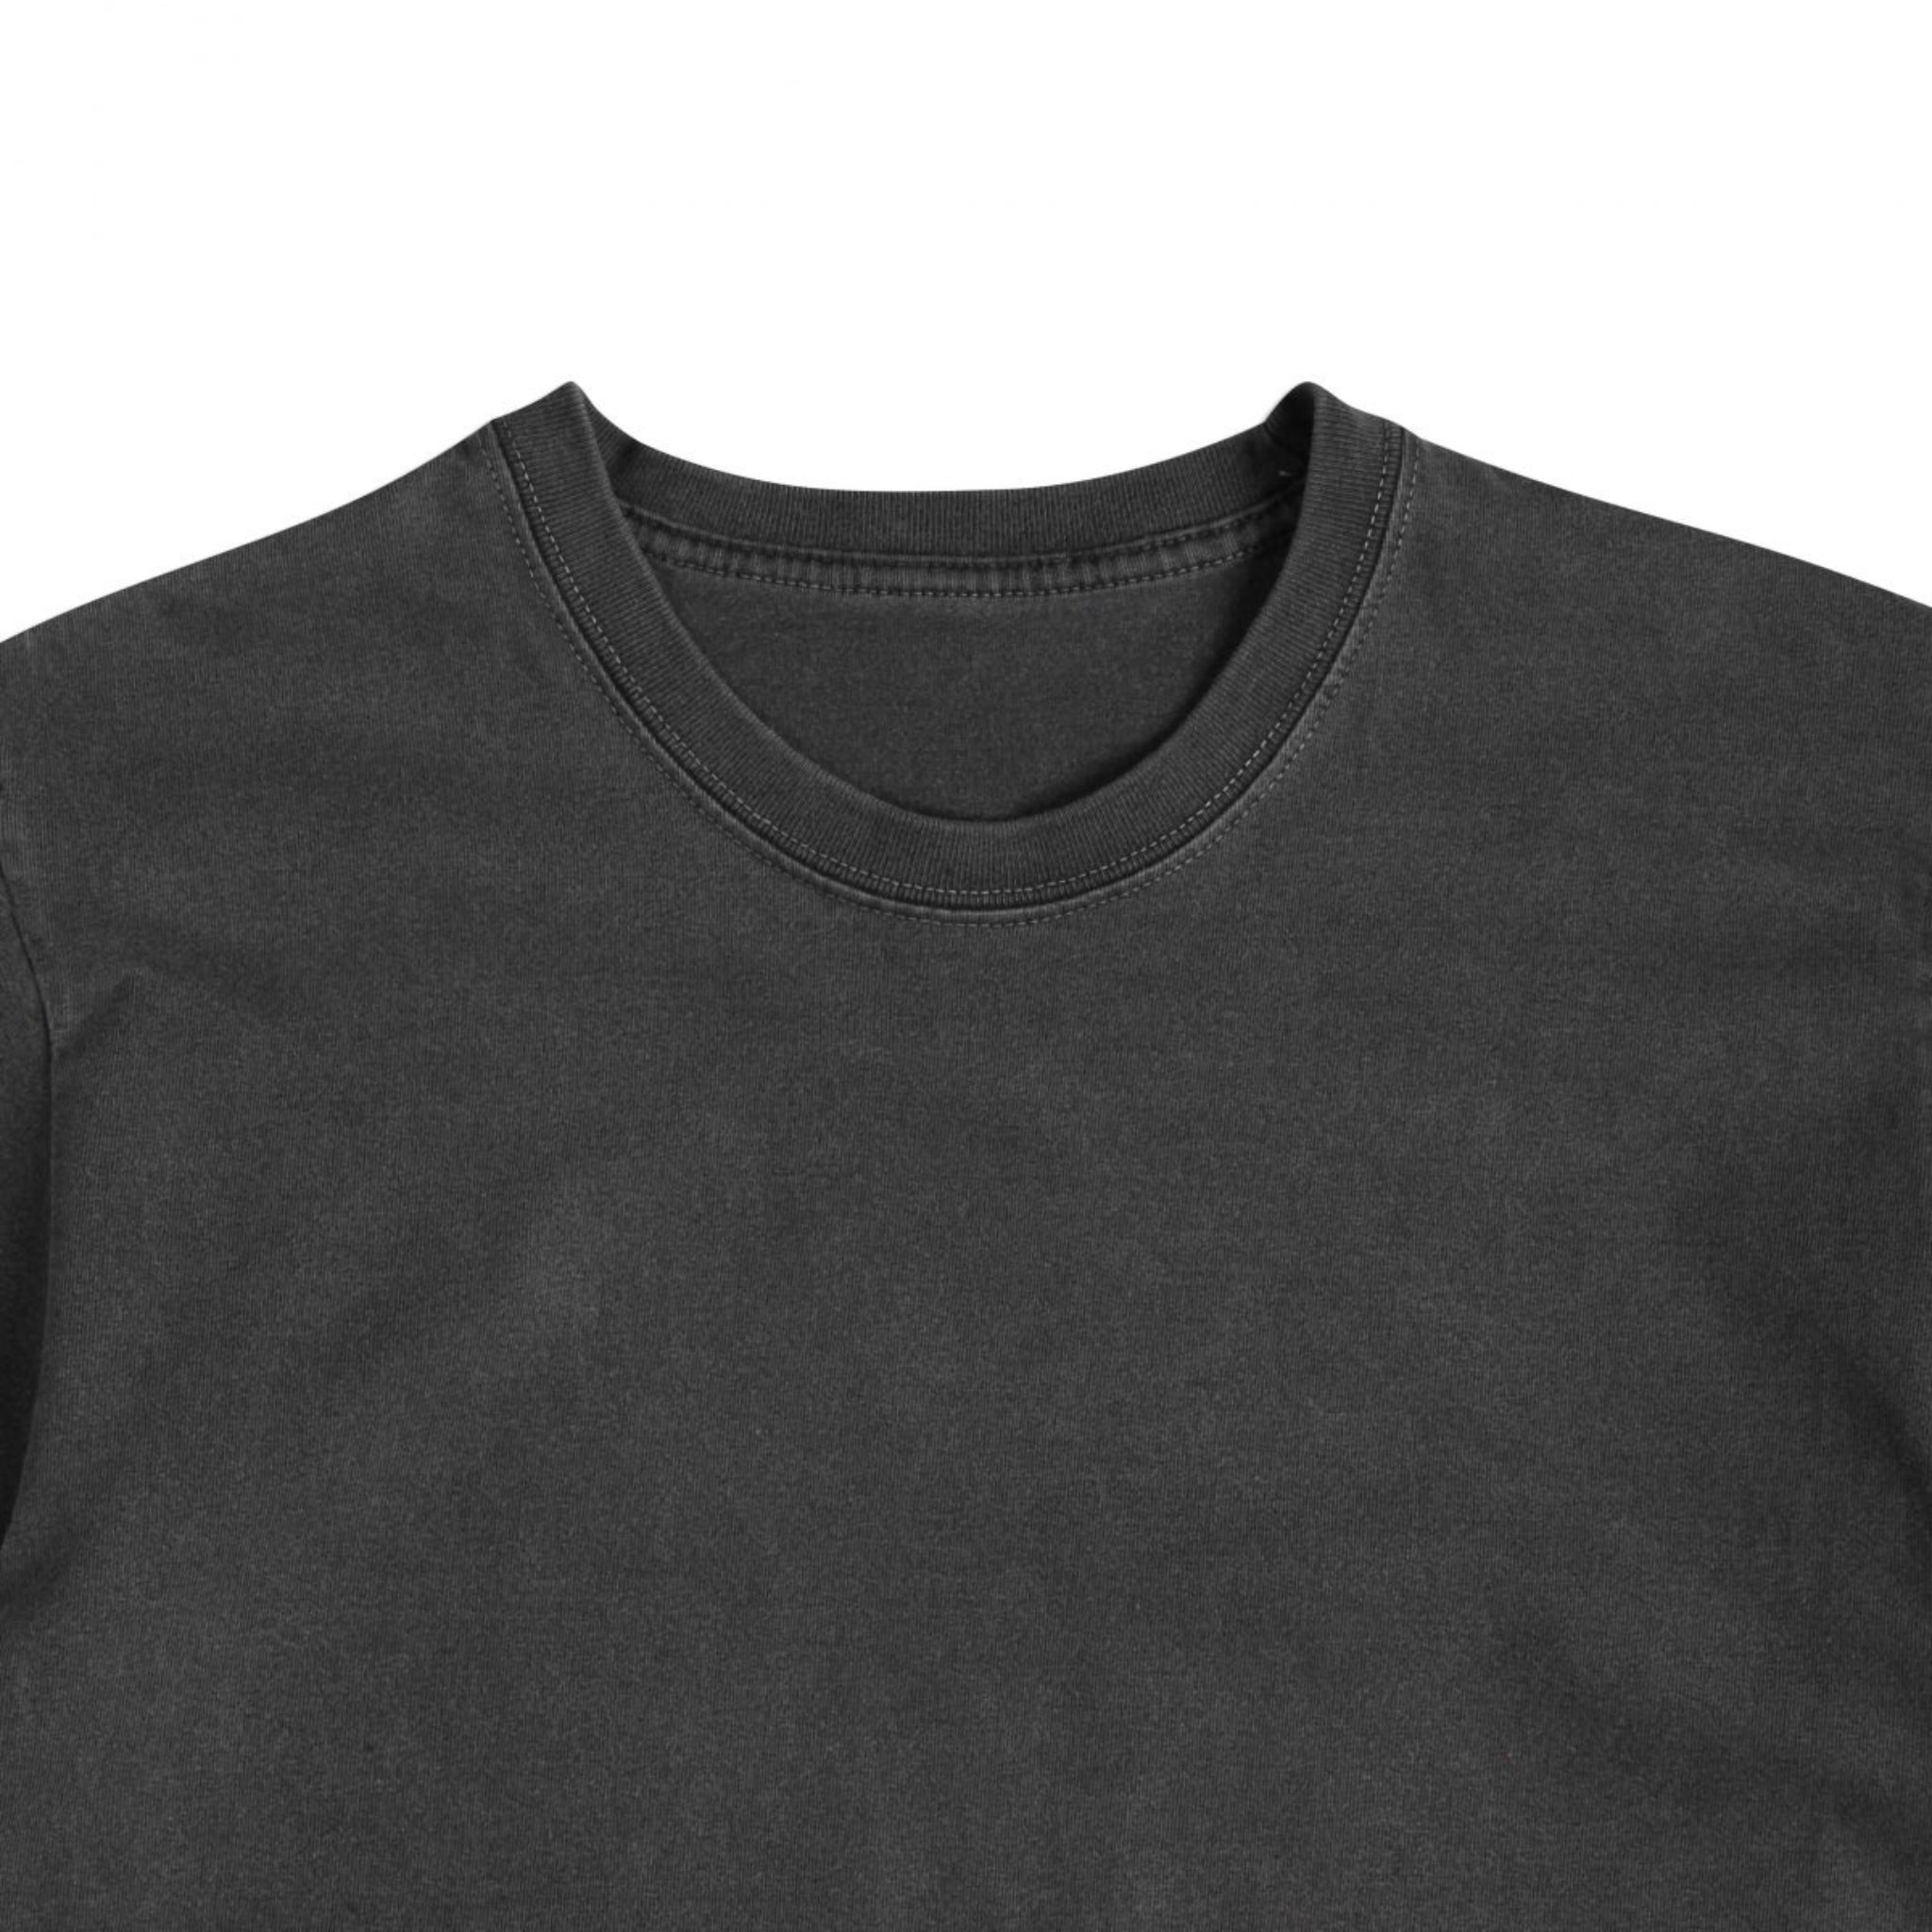 Front detailed view of a charcoal cotton t-shirt against a white bkground.